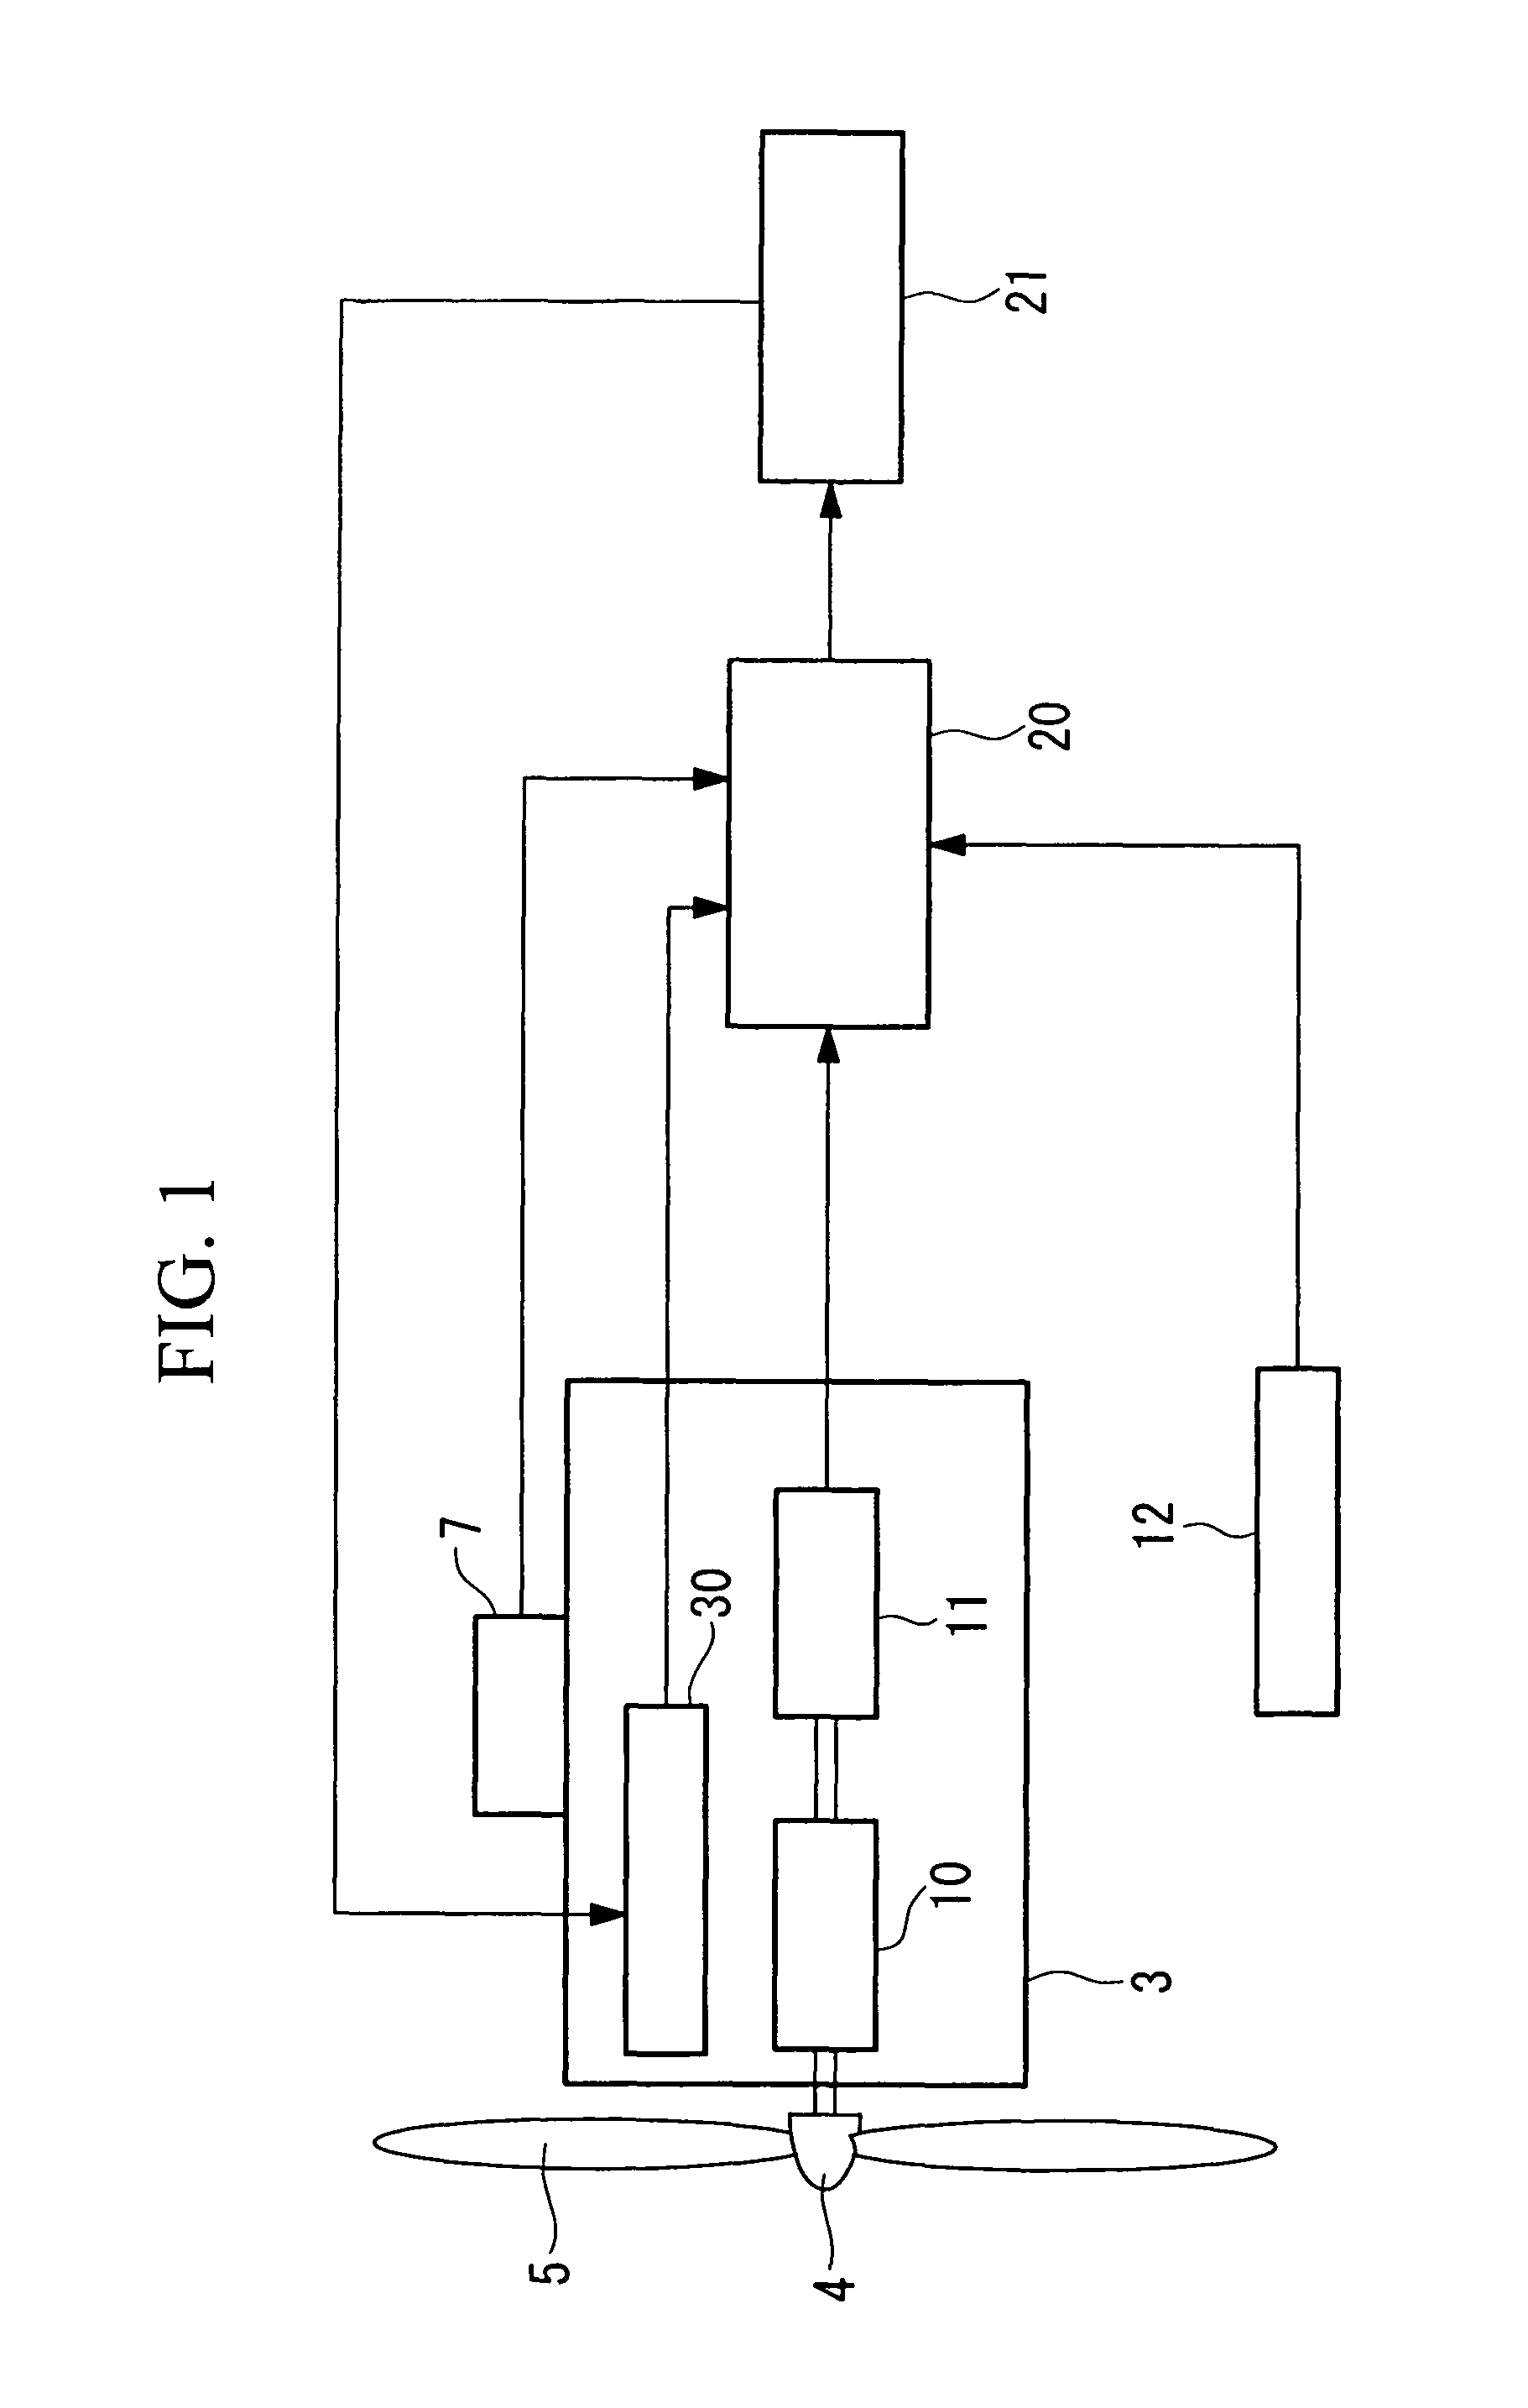 Wind turbine generator system including controller that performs cut-out control